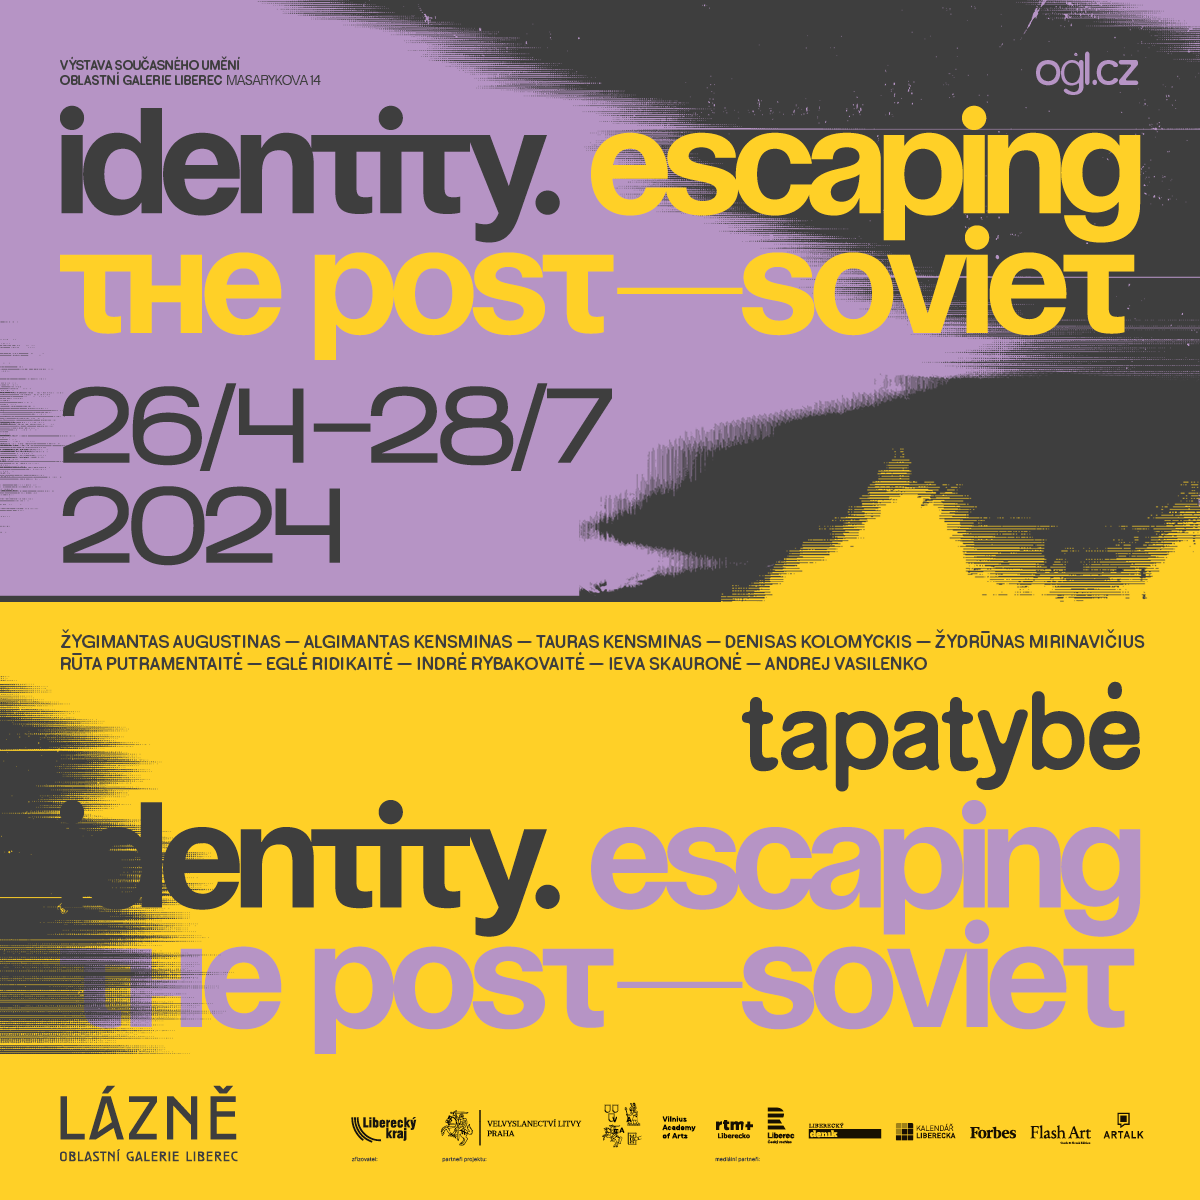 Identity. Escaping the Post-Soviet